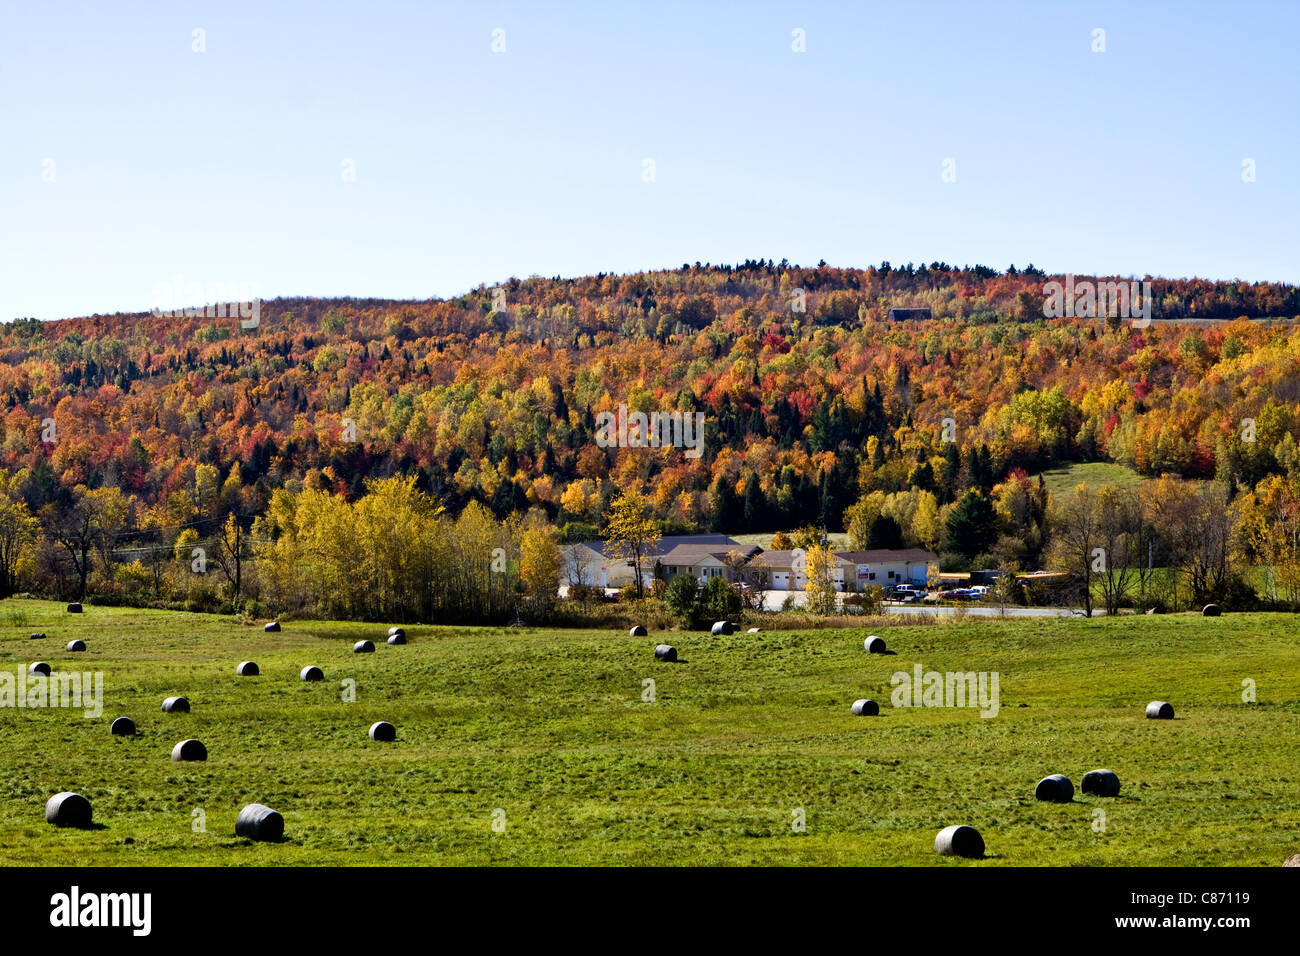 Indian summer in Quebec, Canada. Hay bales on the field. Maple forest in the background. Stock Photo